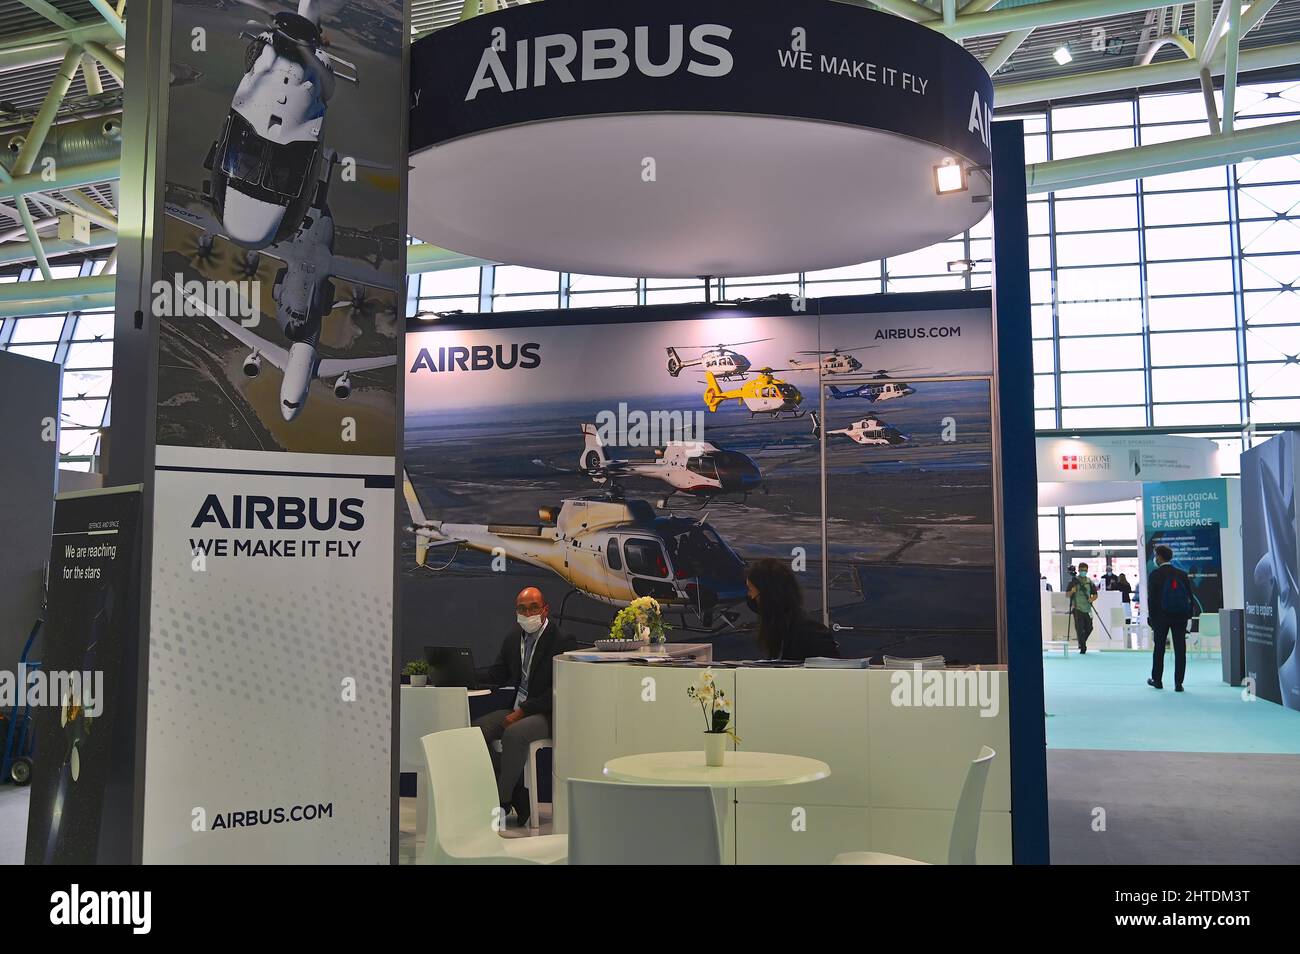 Airbus aviation company in Turin, Italy, with booth and logo at an aerospace fair Stock Photo